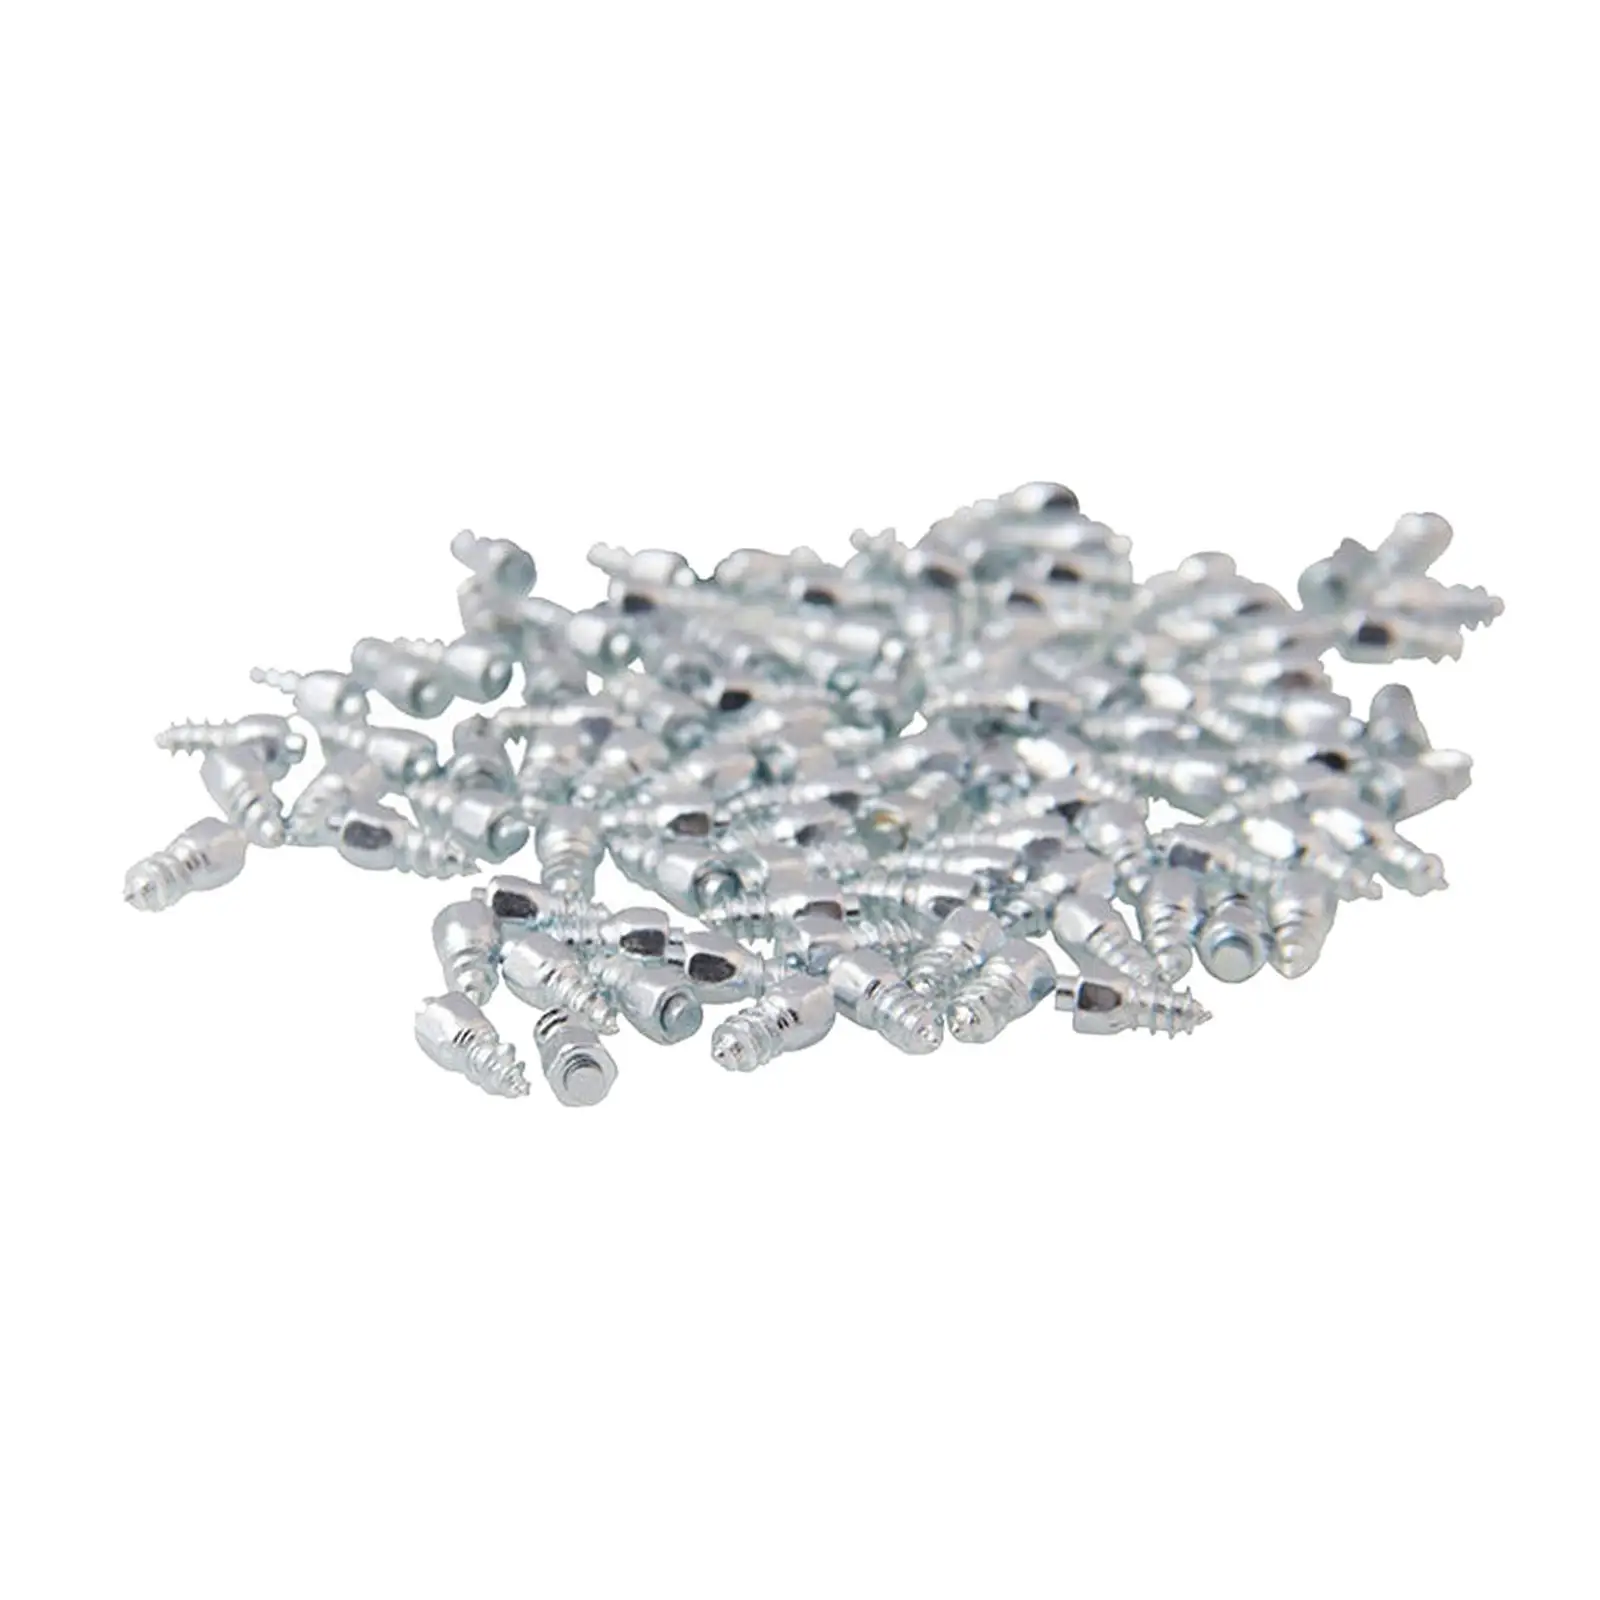 100pcs 9 mm Tire Snow Chains Spikes Studs For ATV Car Motorcycle Tire Tyre Snow Chains Studs